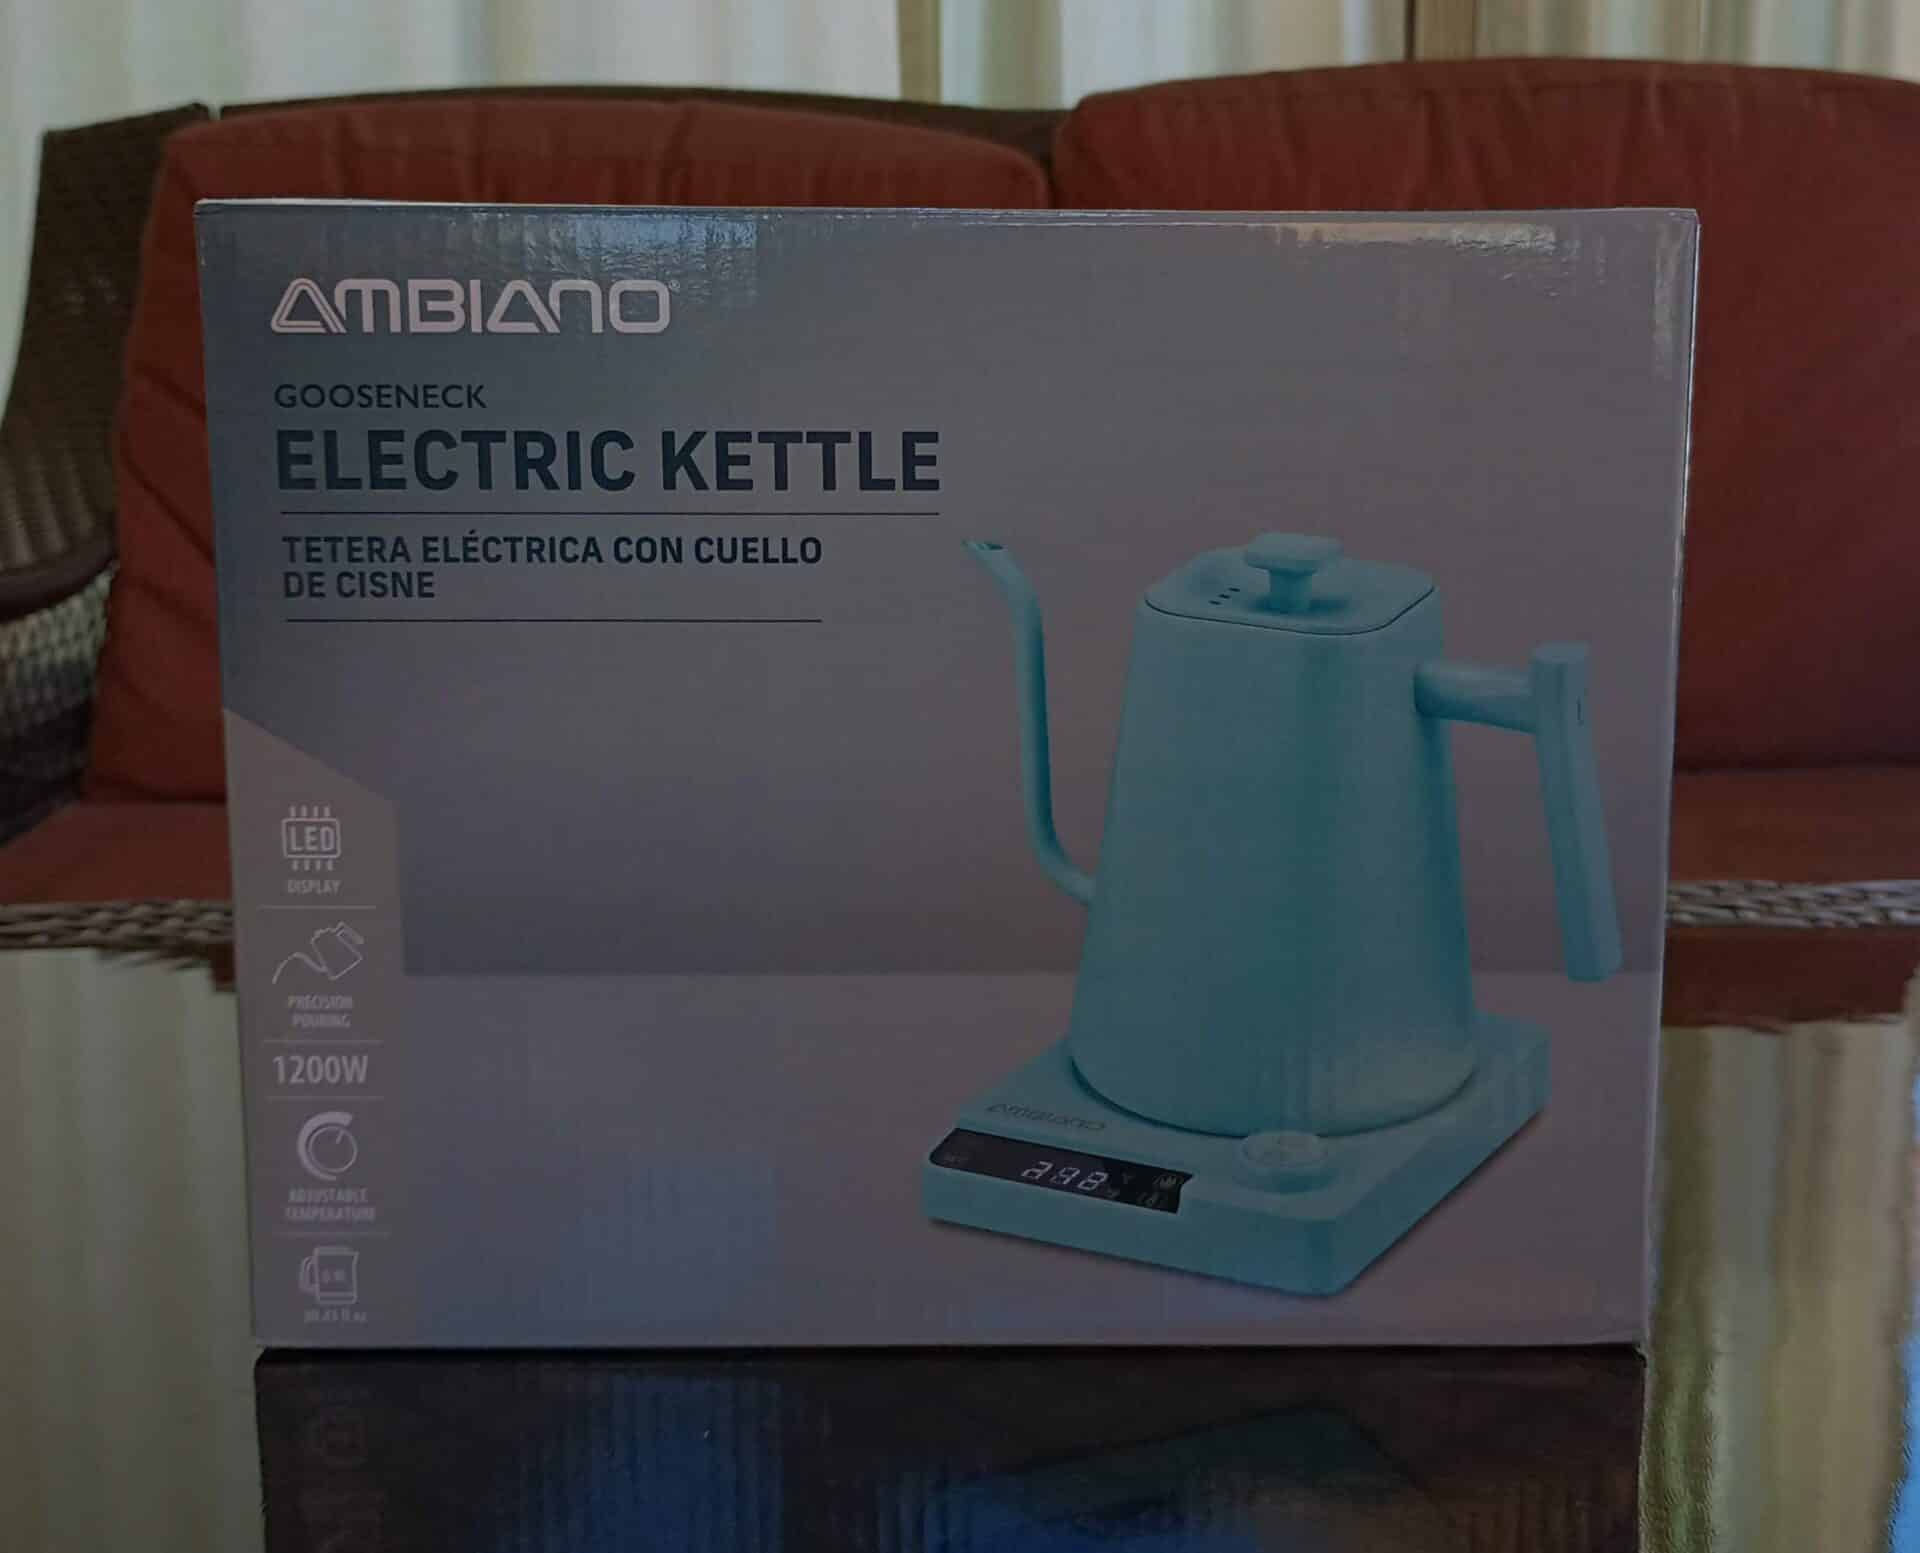 Timemore FISH Smart Electric Pour Over Kettle (Unboxing) 